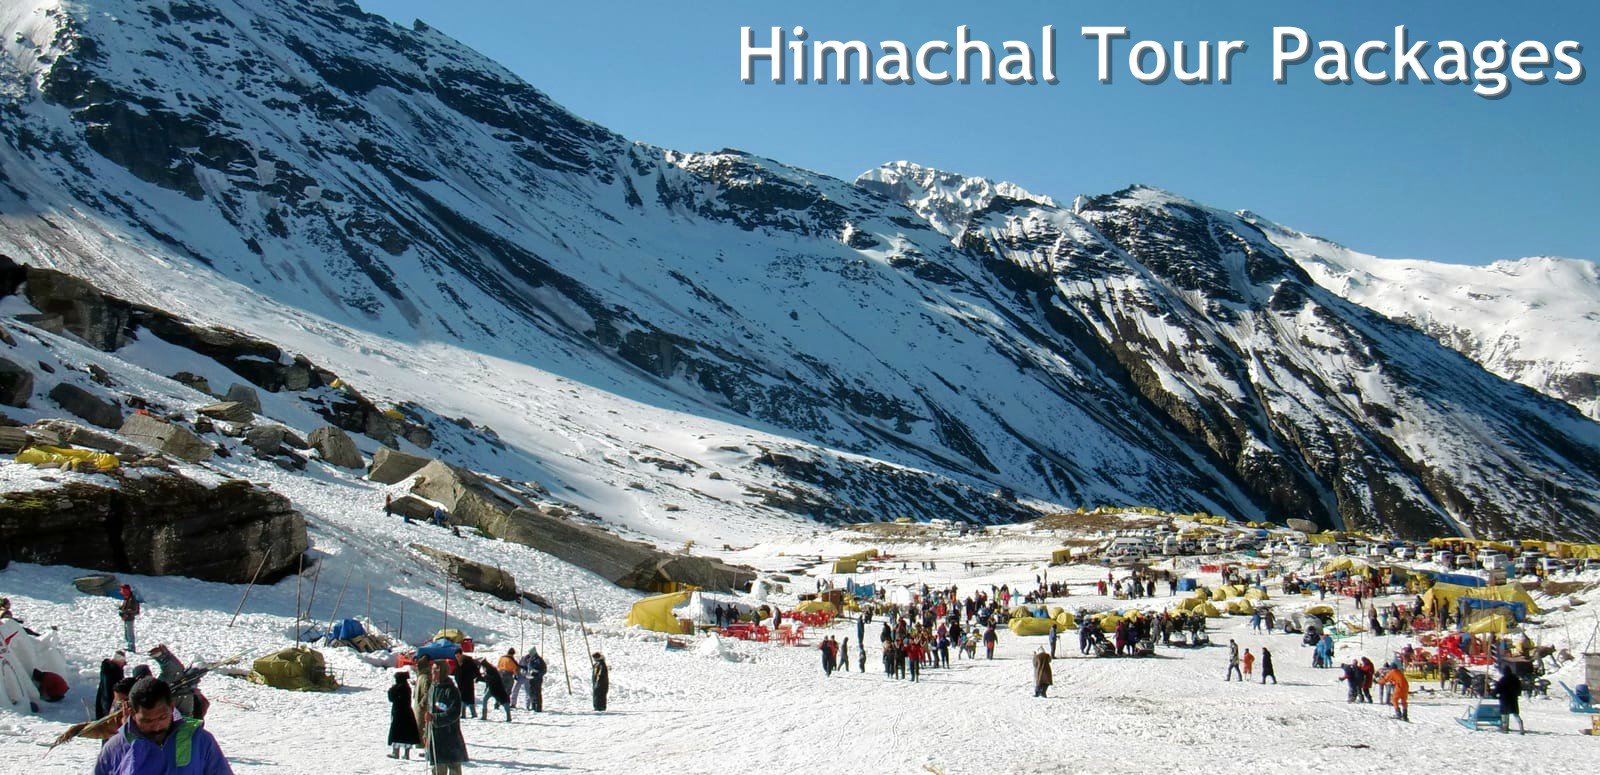 Book Himachal Tour Packages from Ahmedabad At Minsuch Holidays